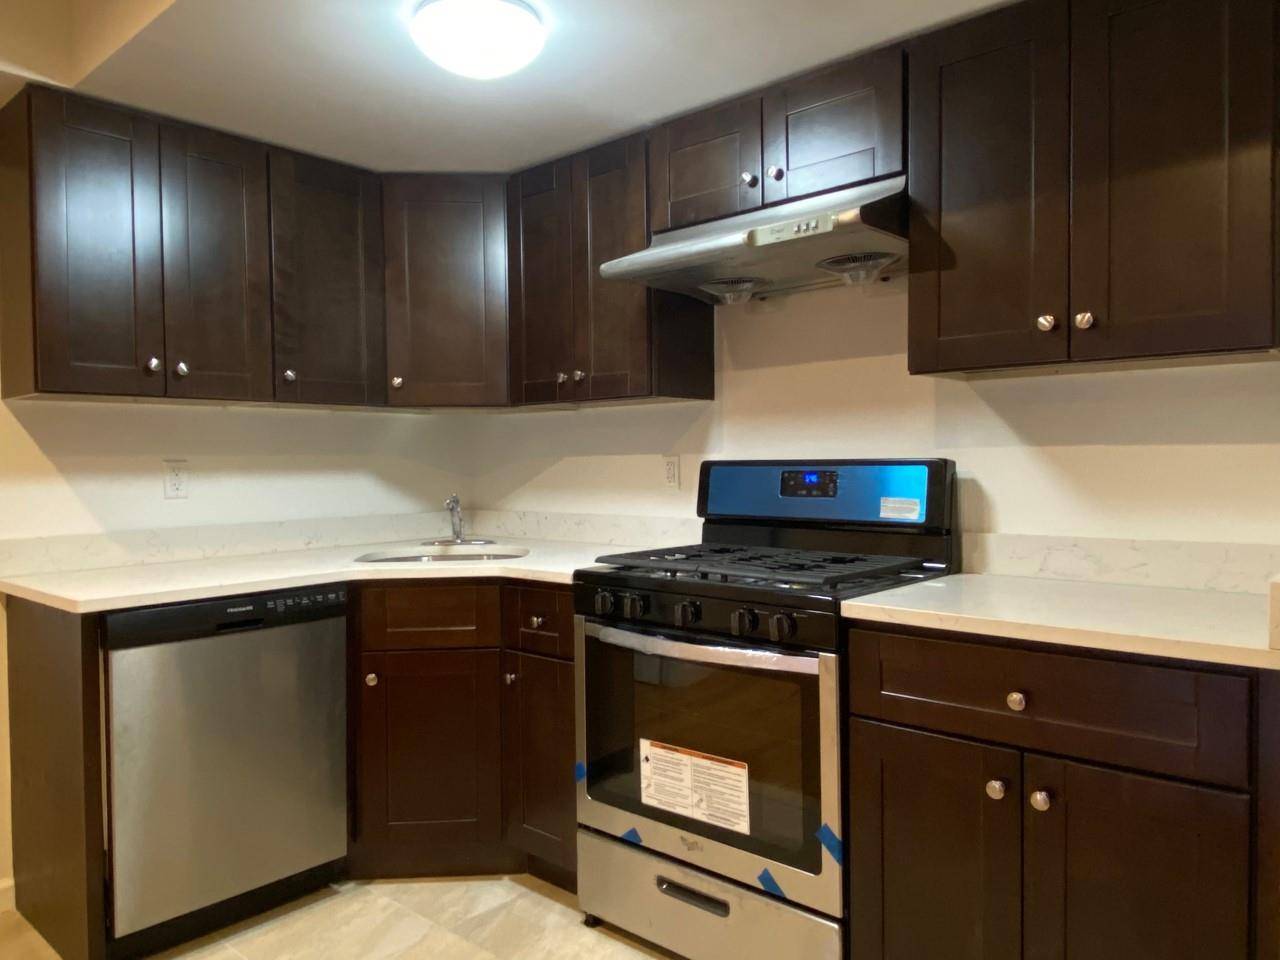 Brand new condo rental 2 bedroom 1 bath with a private balcony in an elevator building.